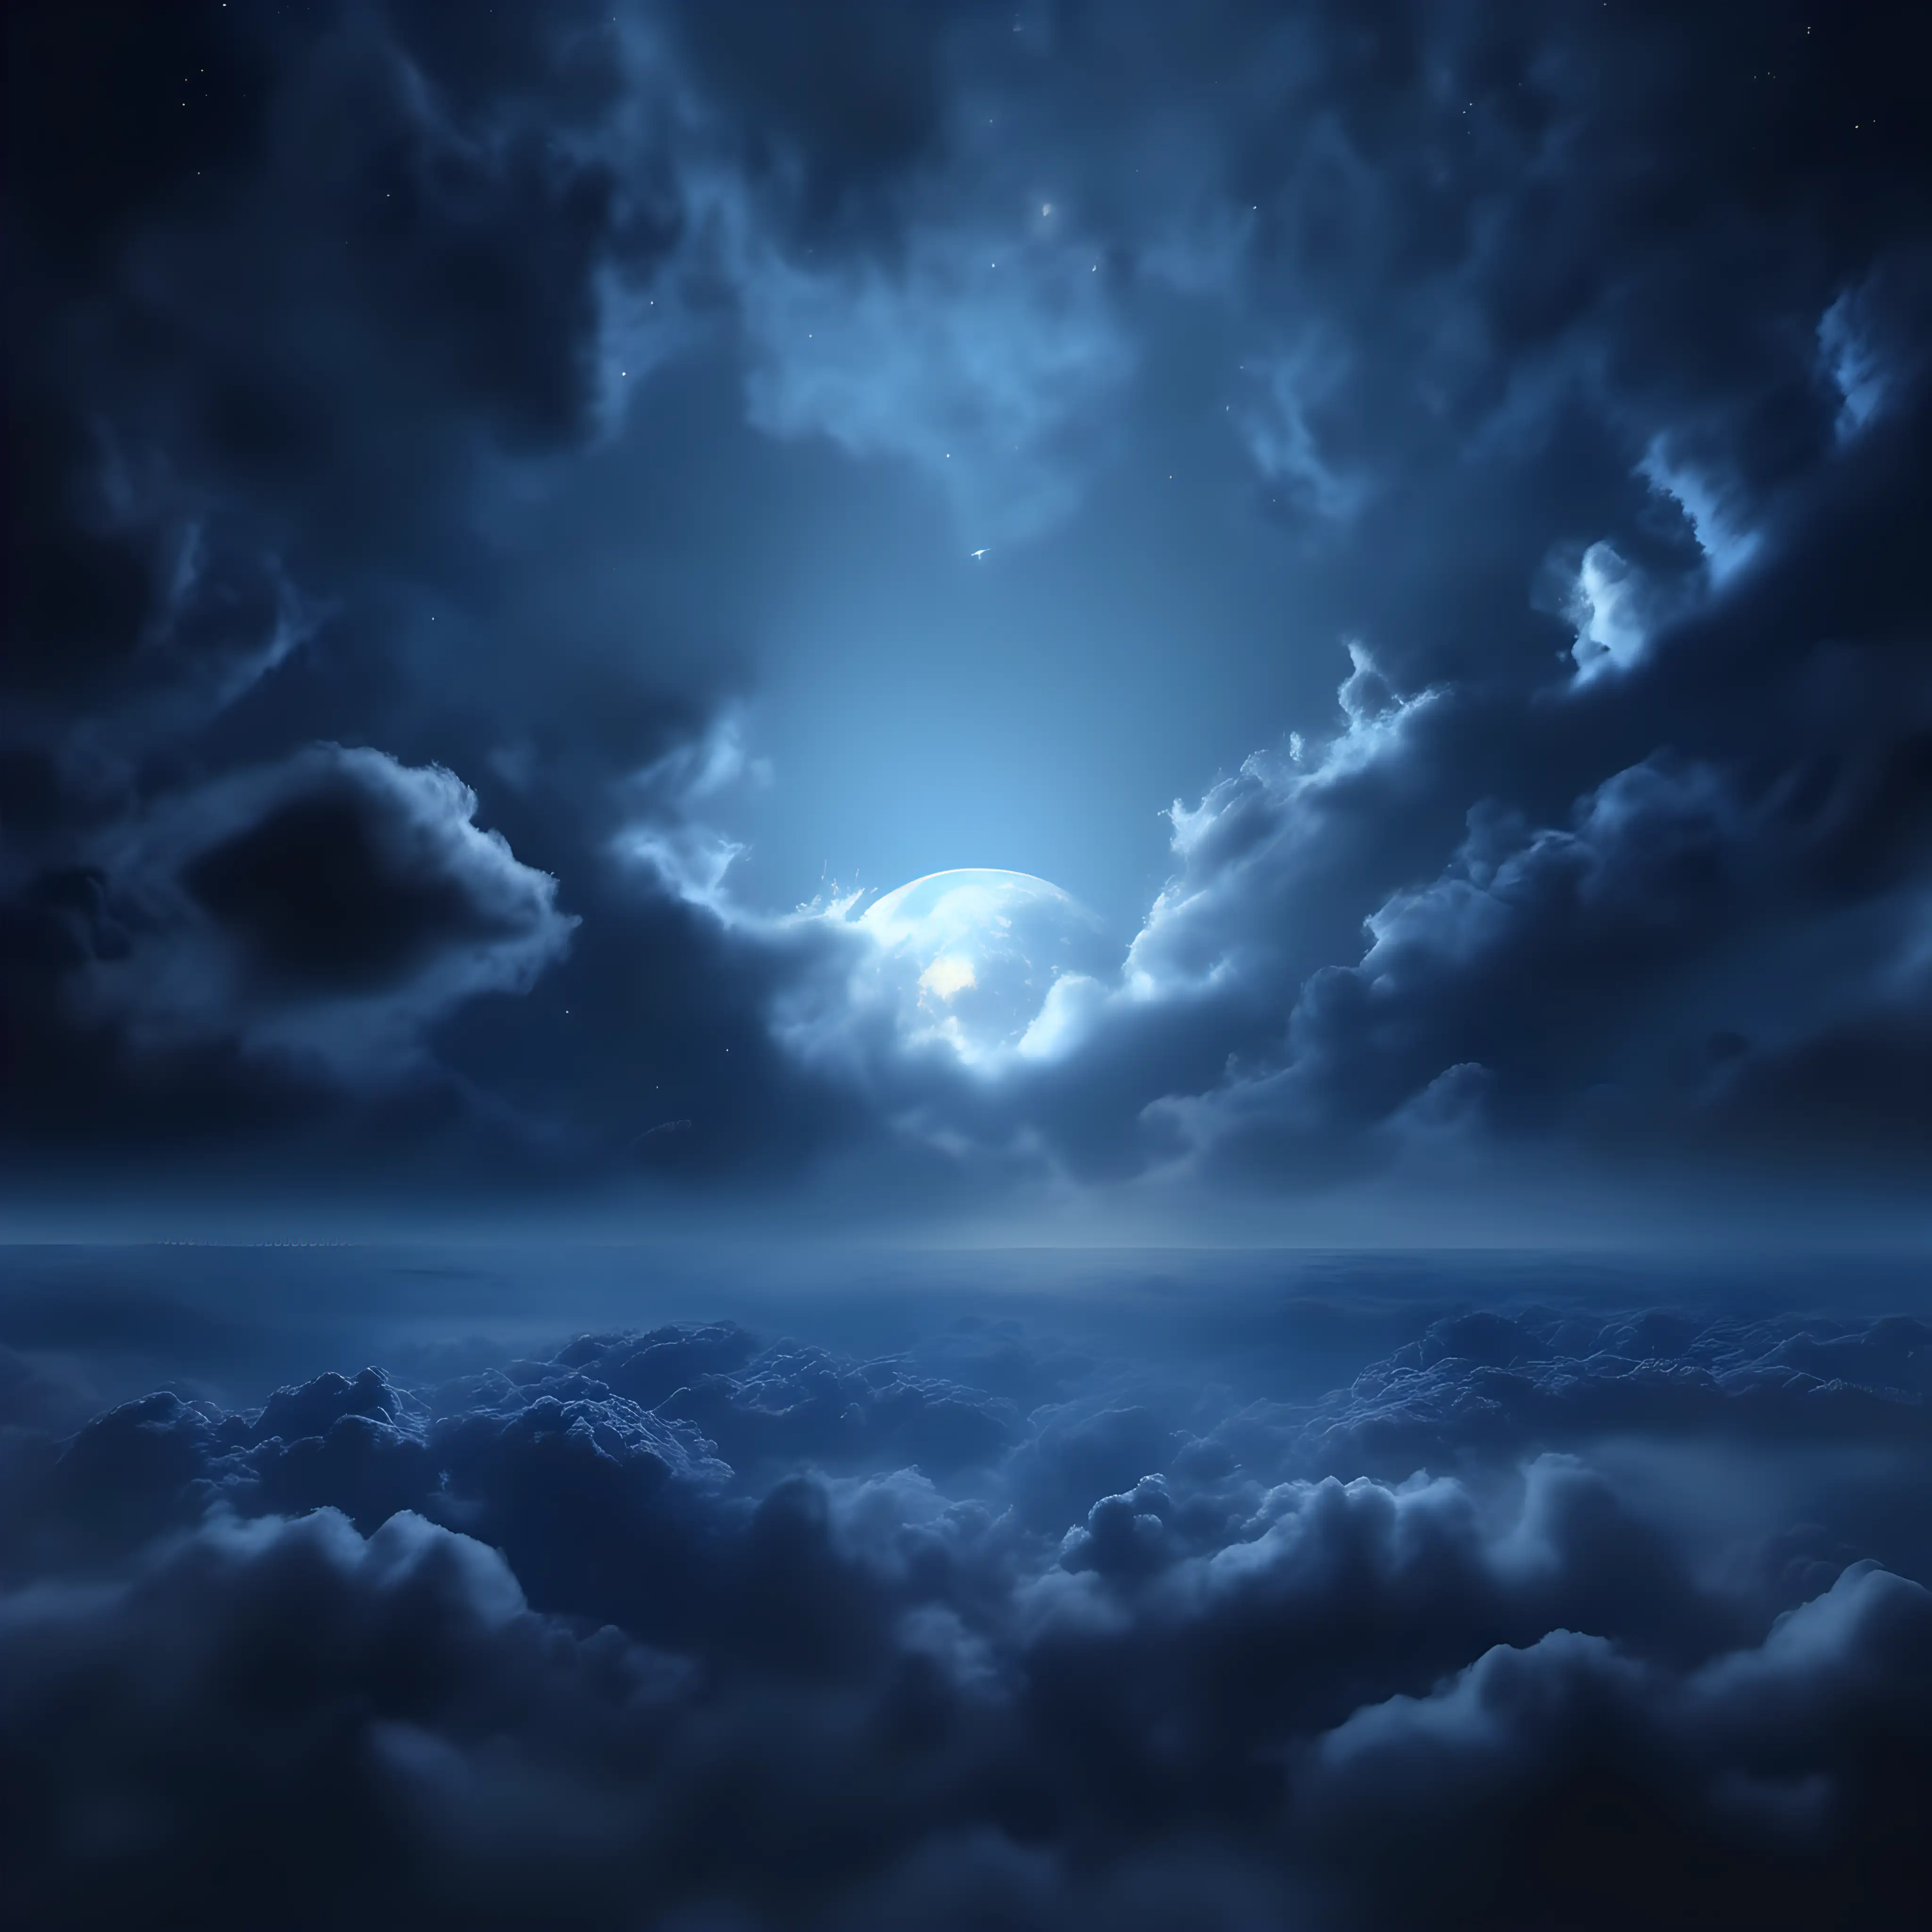 realistic dark night sky with clouds like the photo